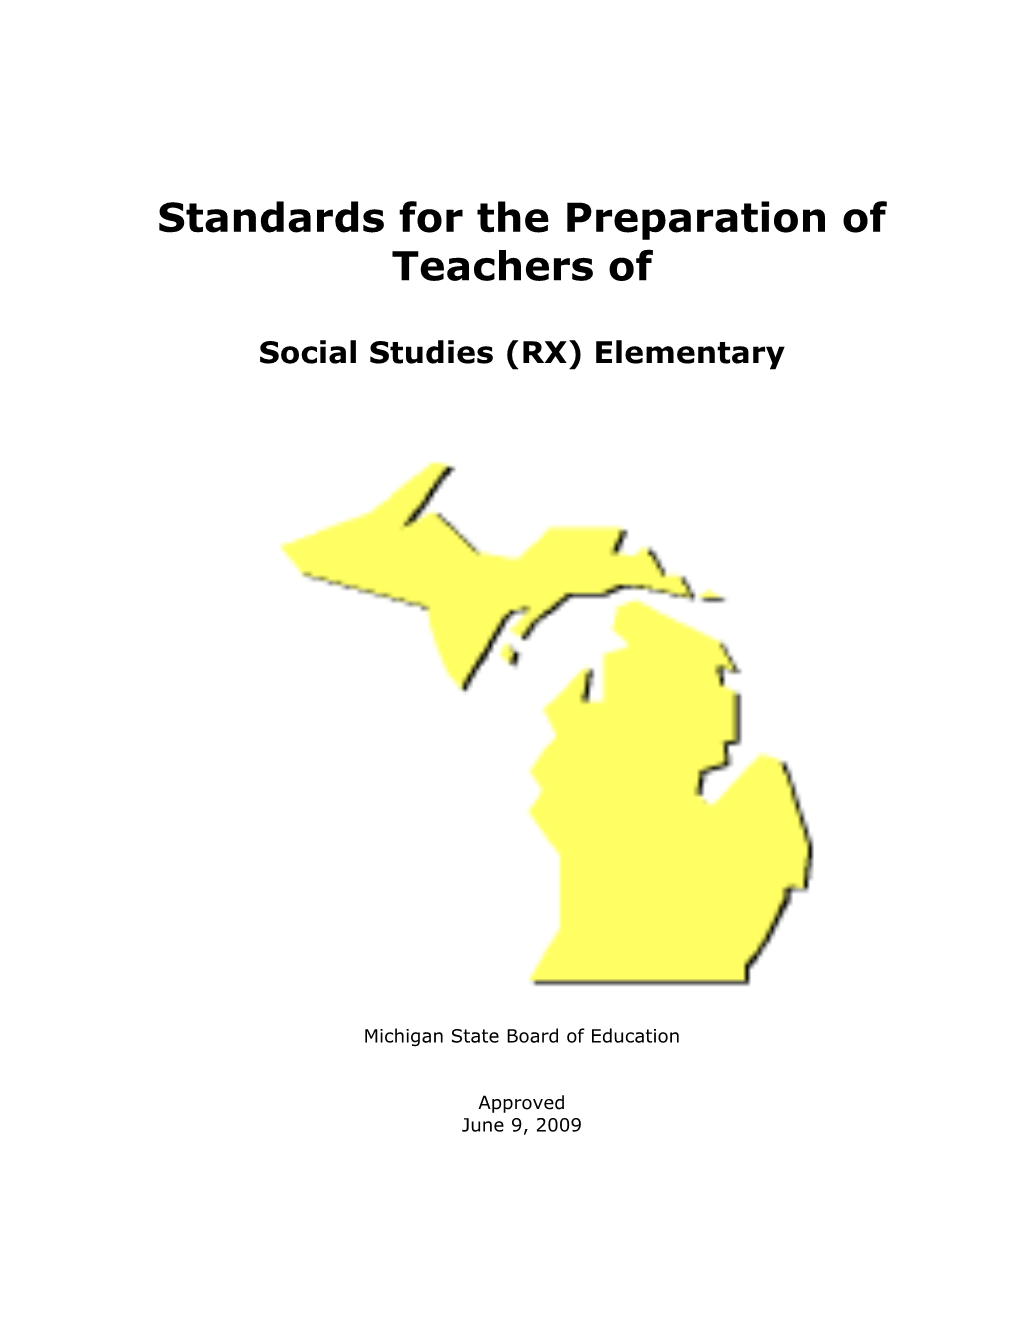 Standards for the Preparation of Teachers Of